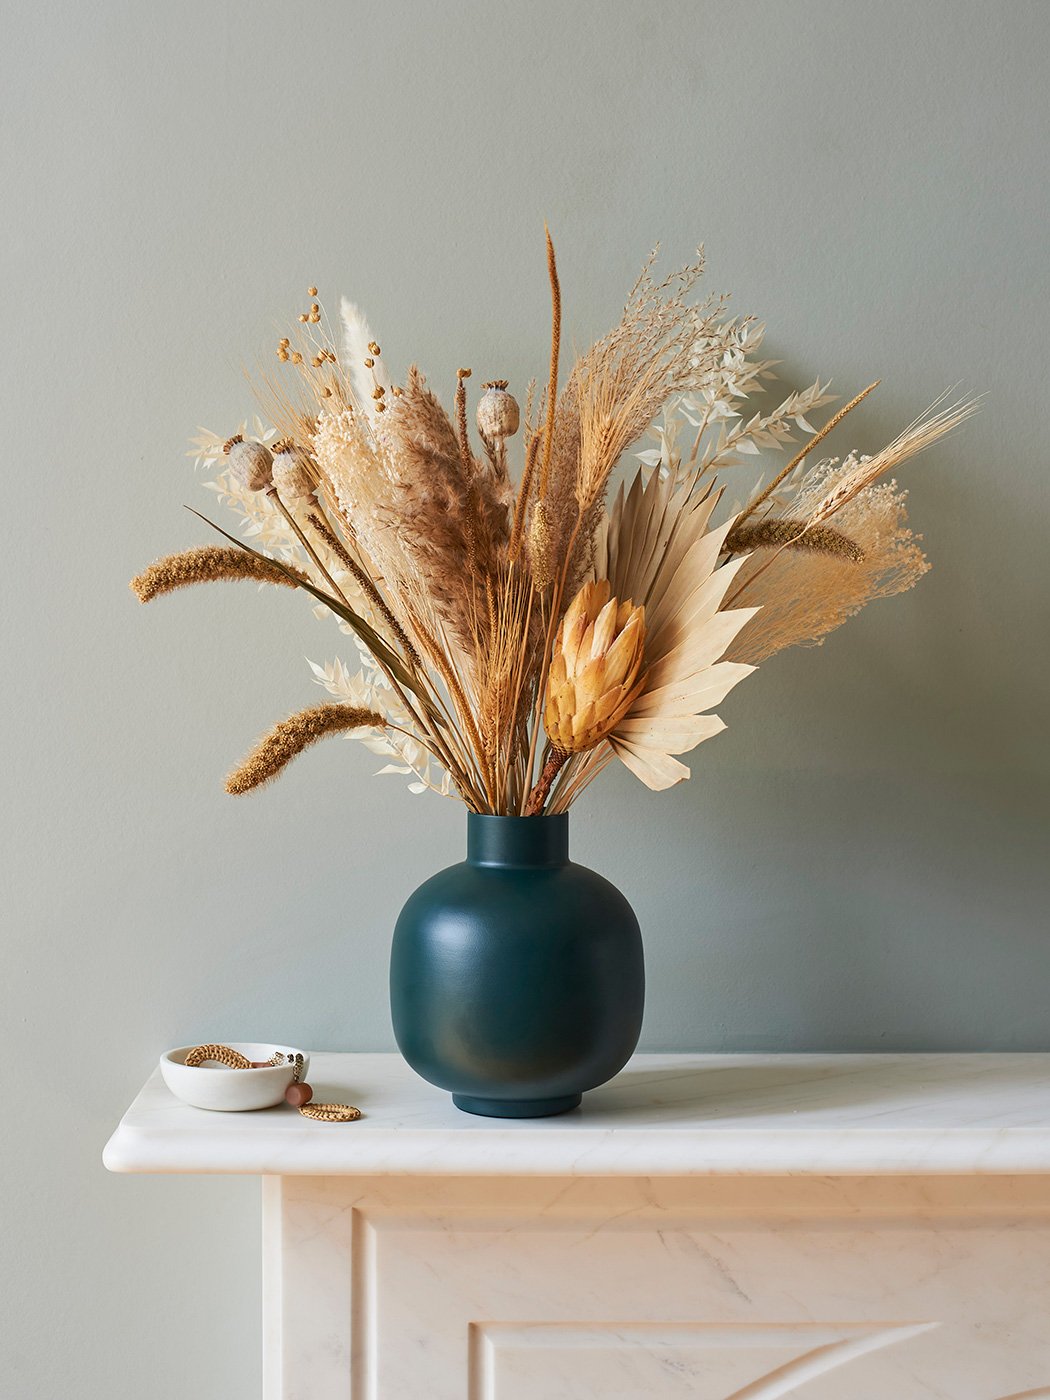 Vase of dried flowers on a mantelpiece